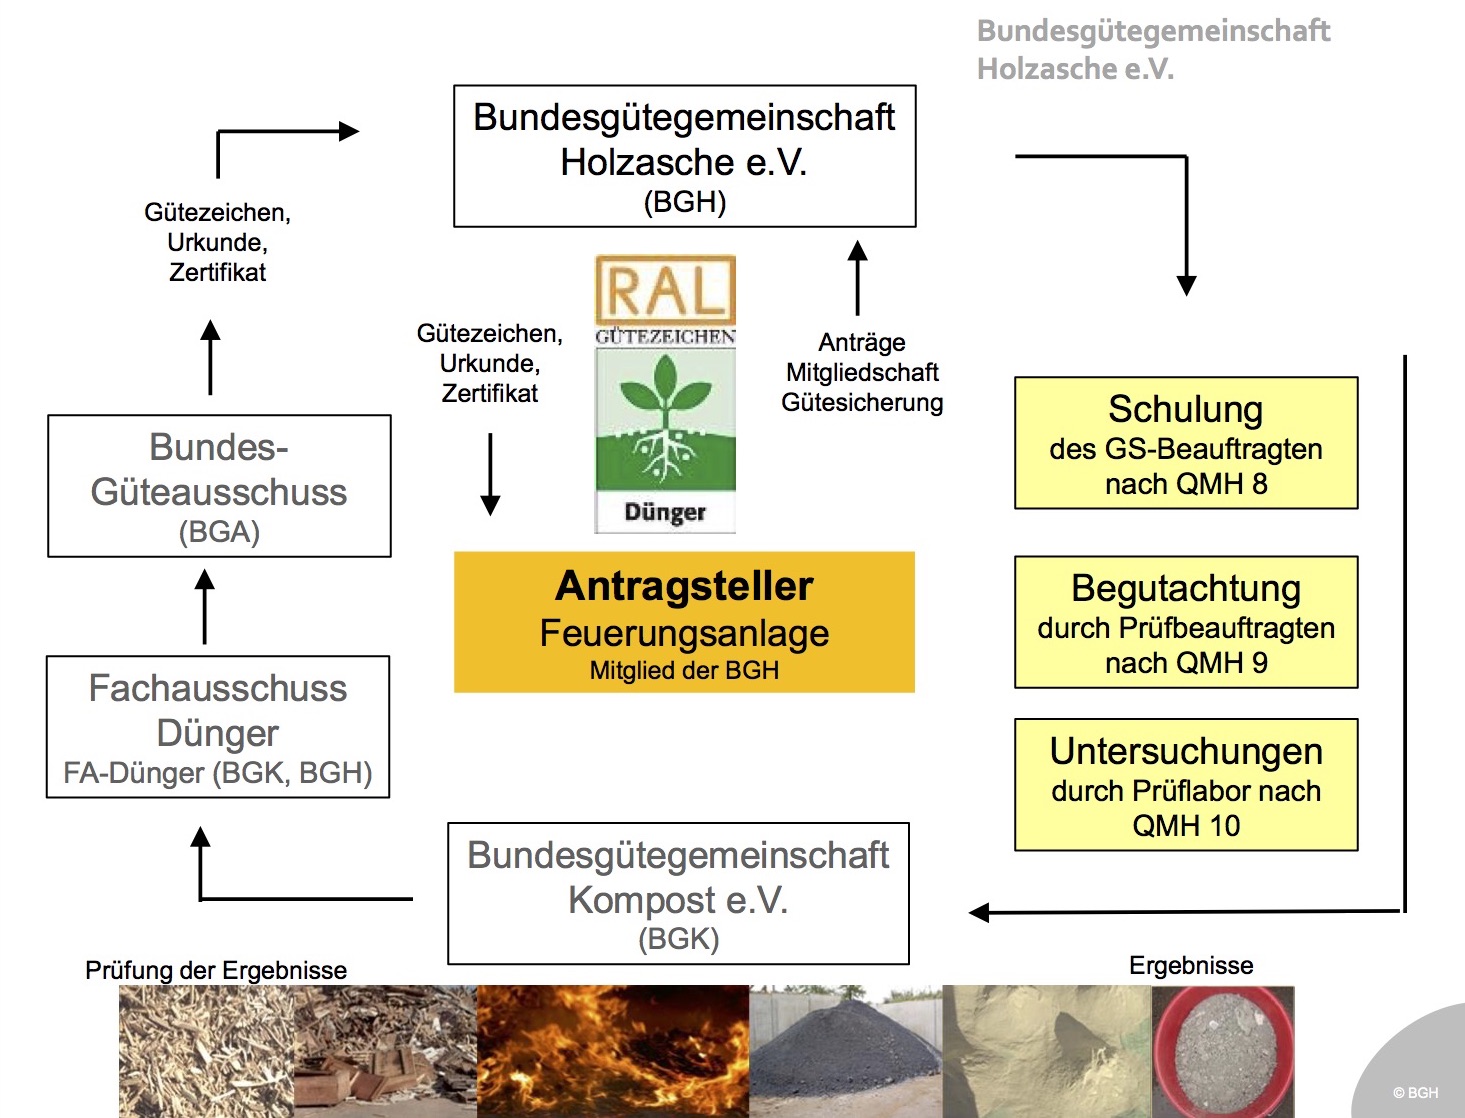  The graphic shows an overview of the activities and cooperations of the Bundesgütegemeinschaft Holzasche e.V. At the bottom, several photos show from left to right the path from wood residues to incineration and wood ash fertiliser. 